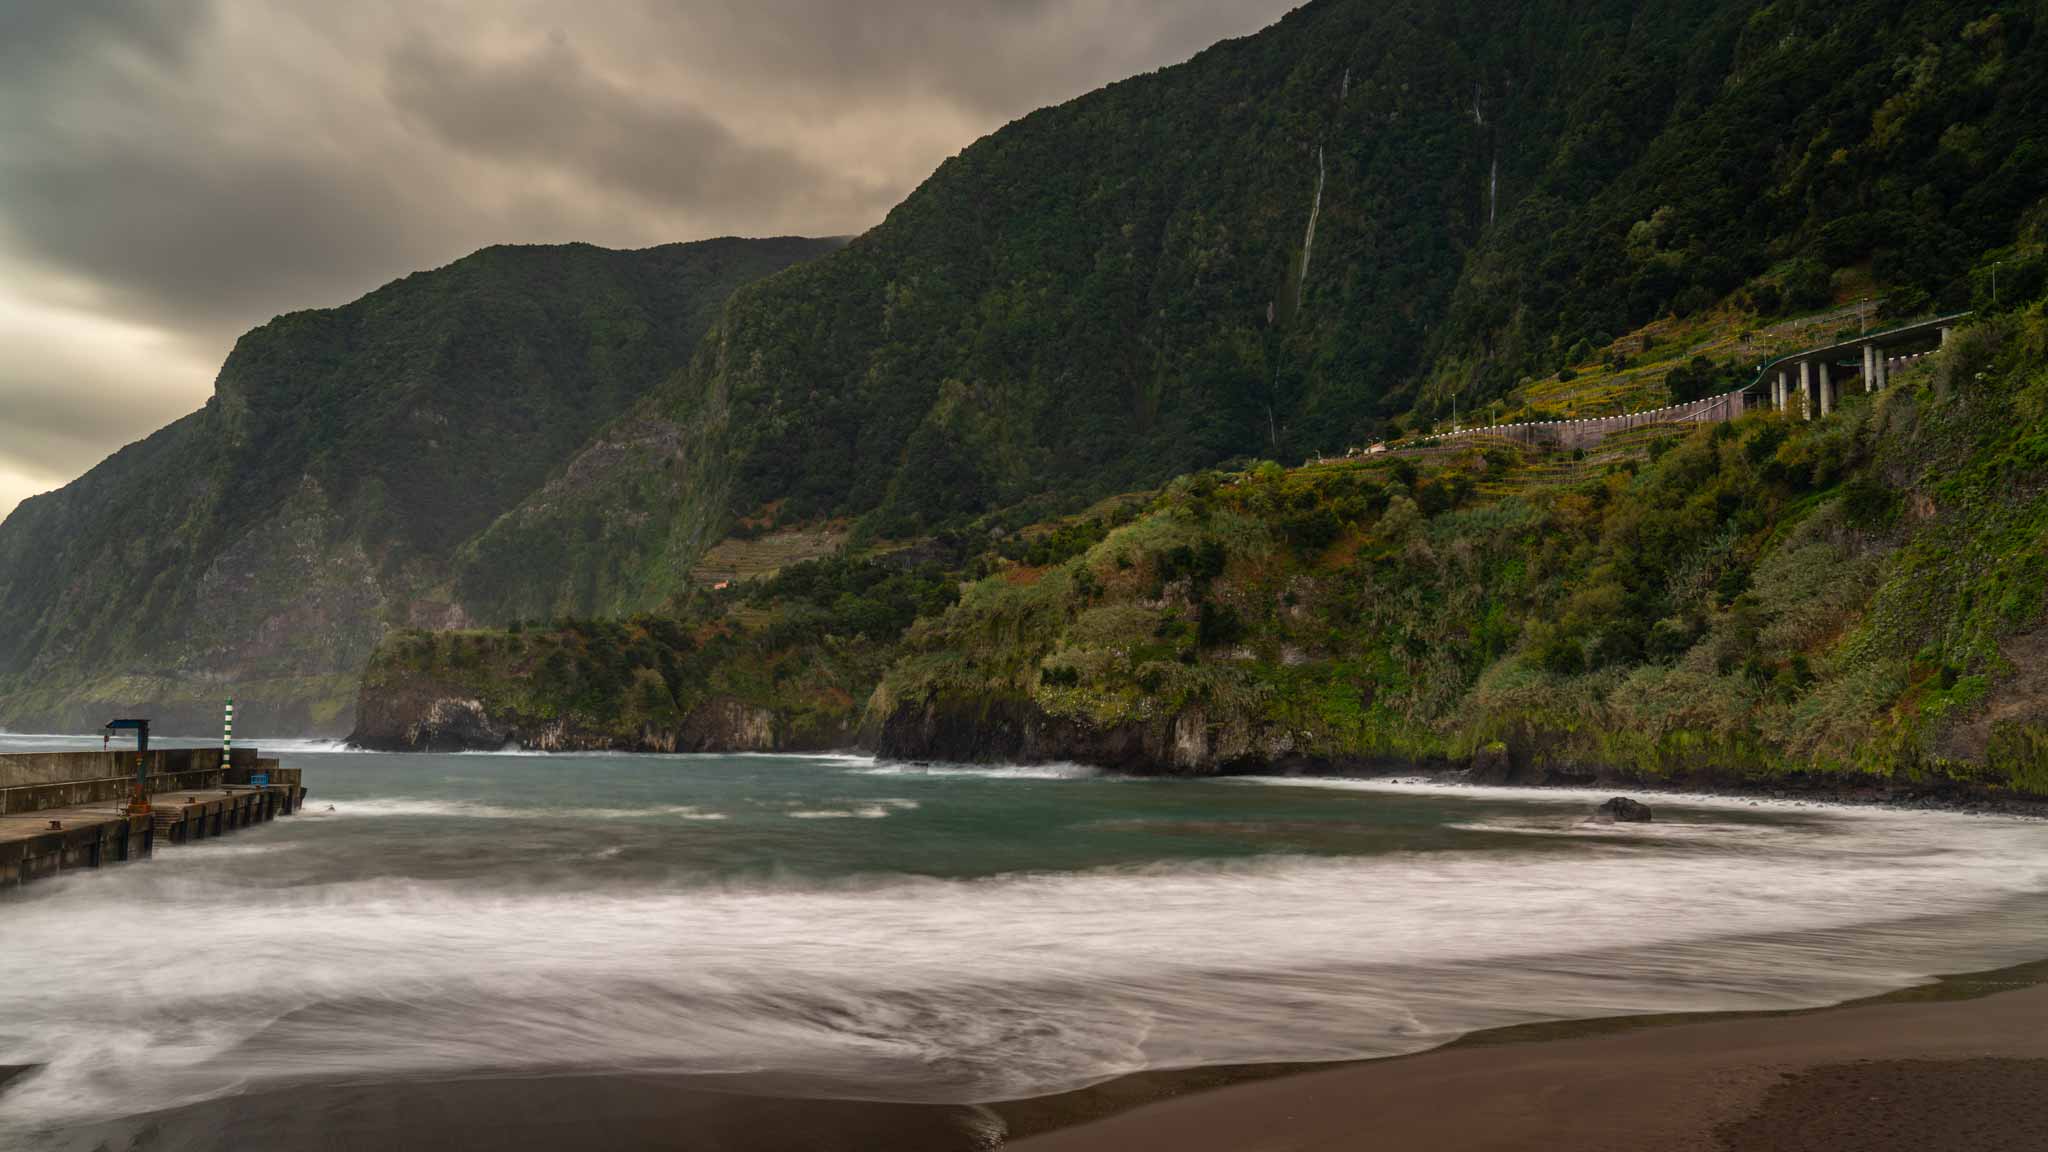 The black sand beach of Seixal with green cliffs and waterfalls